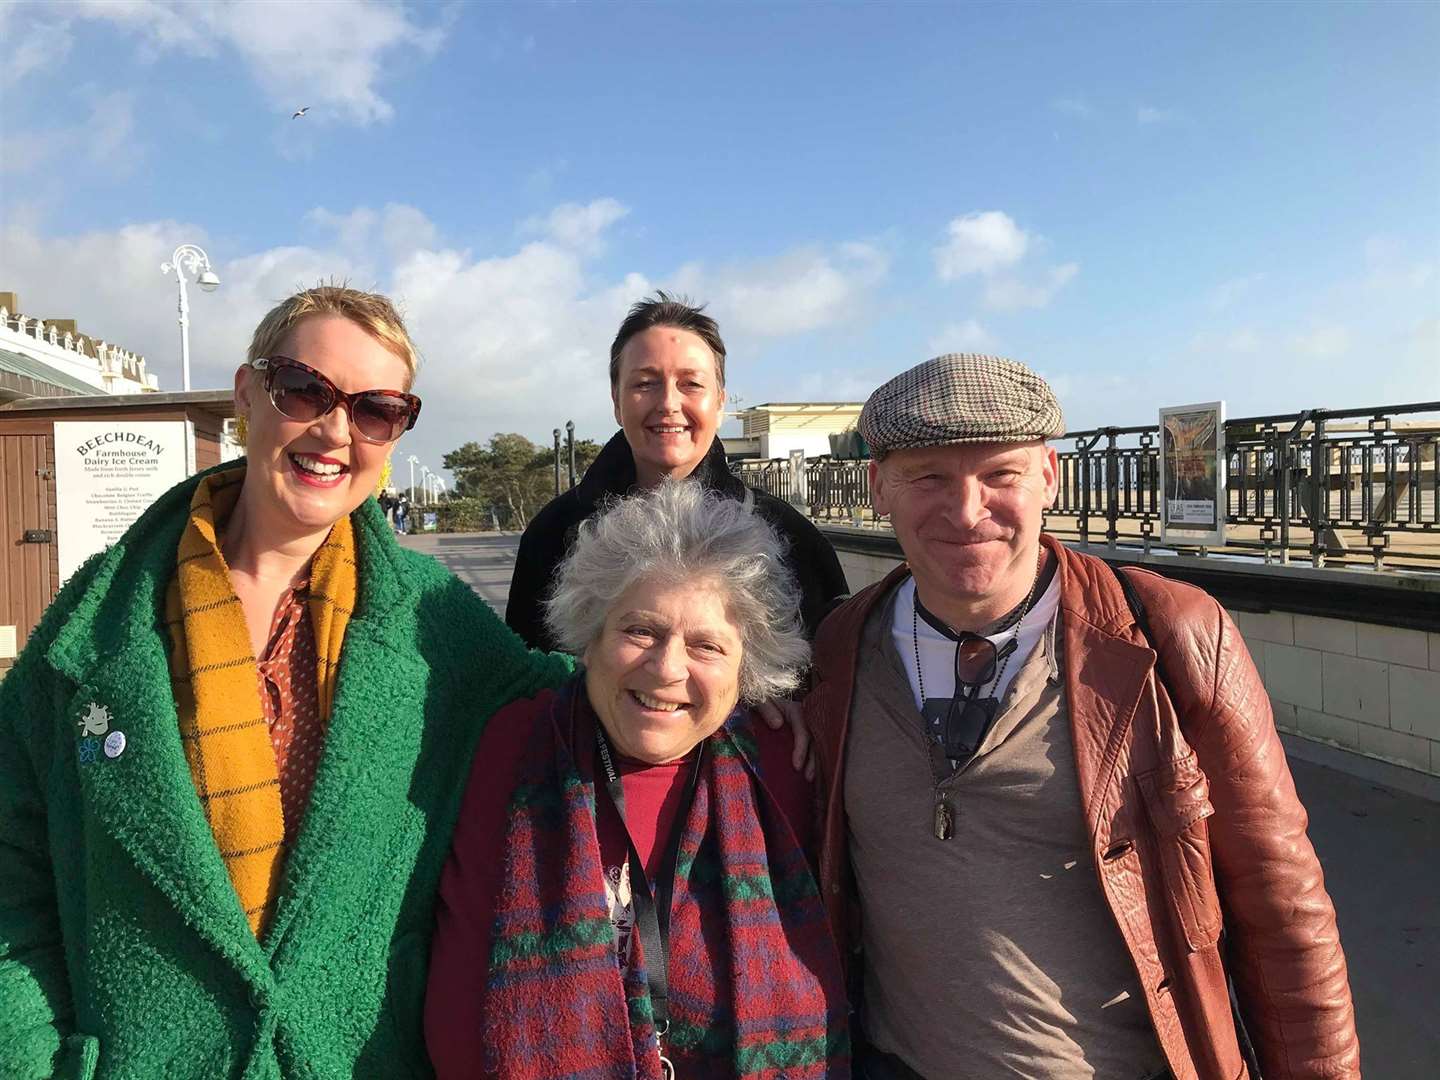 Miriam Margolyes came to Folkestone to support the Leas Pavilion